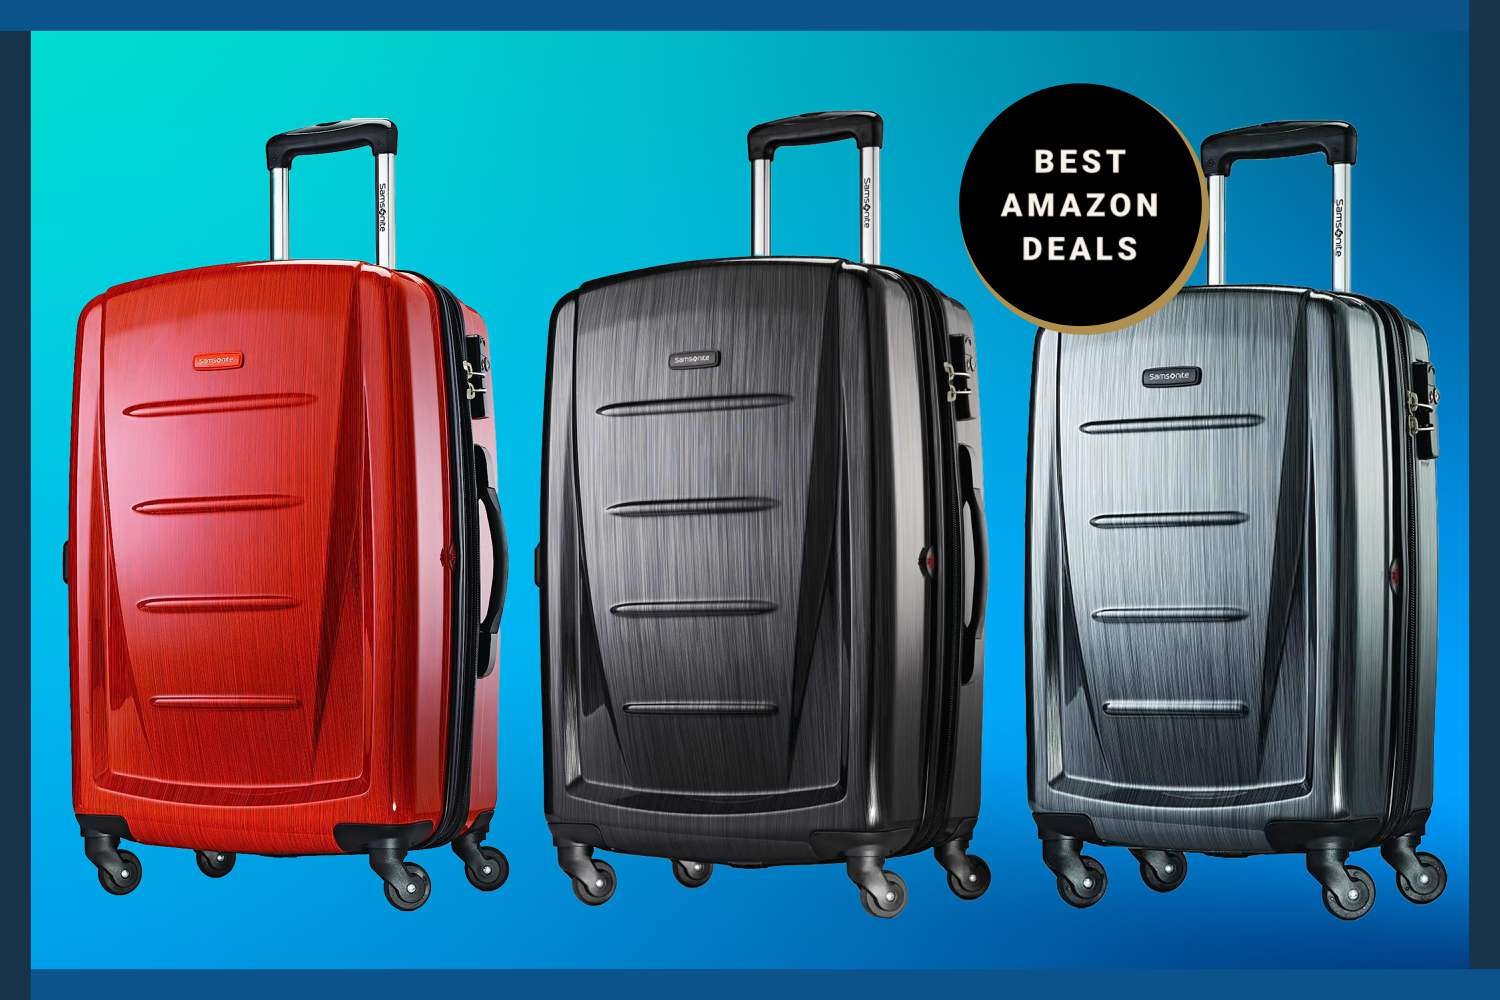 We Can't Believe This Samsonite Suitcase Just Had Its Price Tag Cut in Half for Amazon's October Prime Day